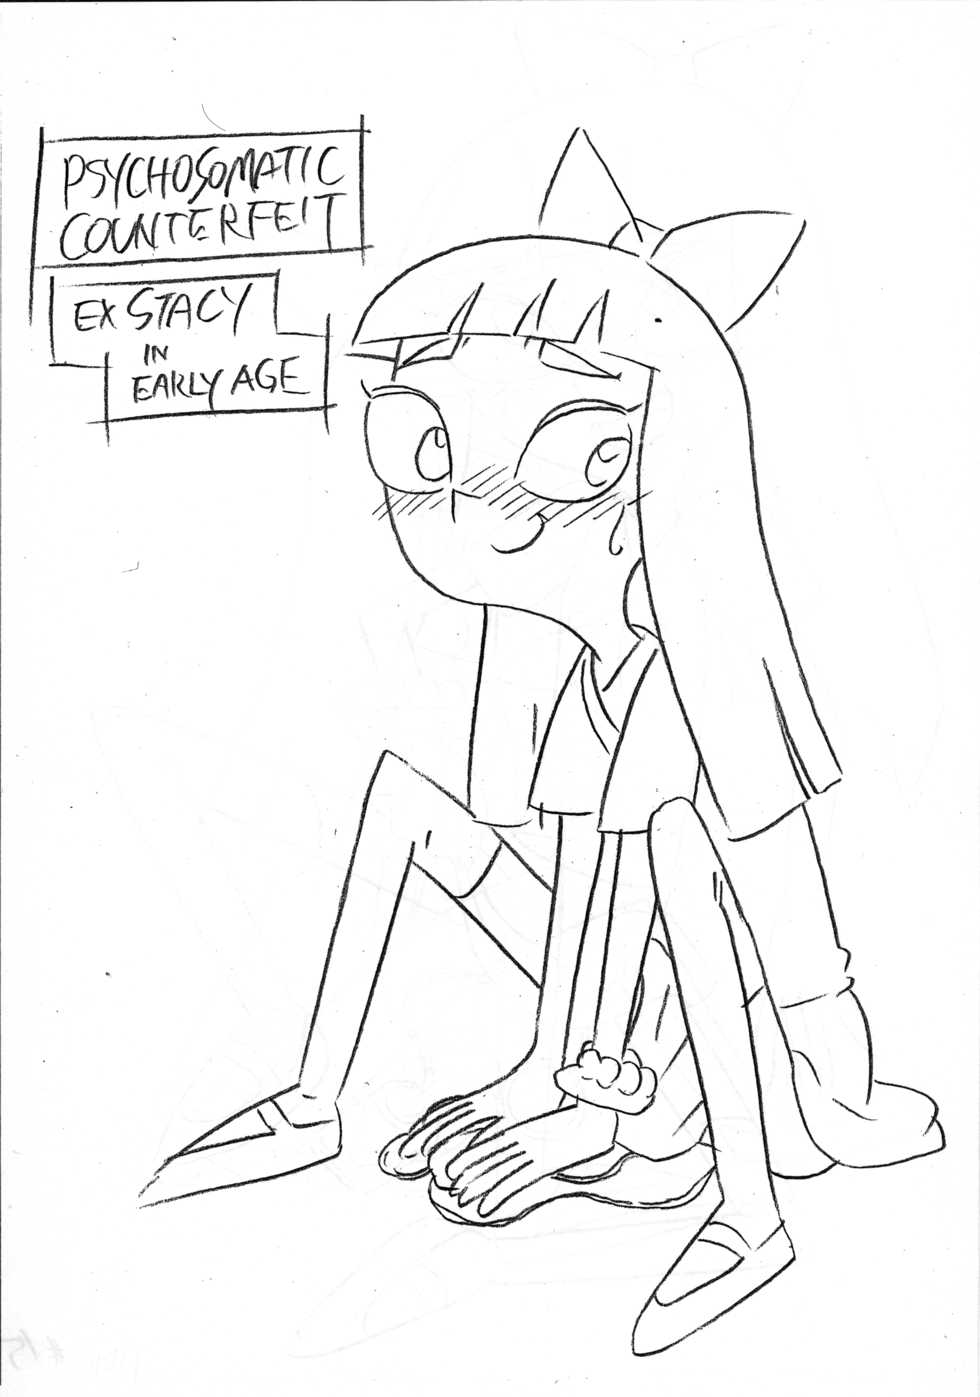 [Union Of The Snake (Shinda Mane)] Psychosomatic Counterfeit Ex: Stacy in Early Age (Phineas and Ferb) - Page 15